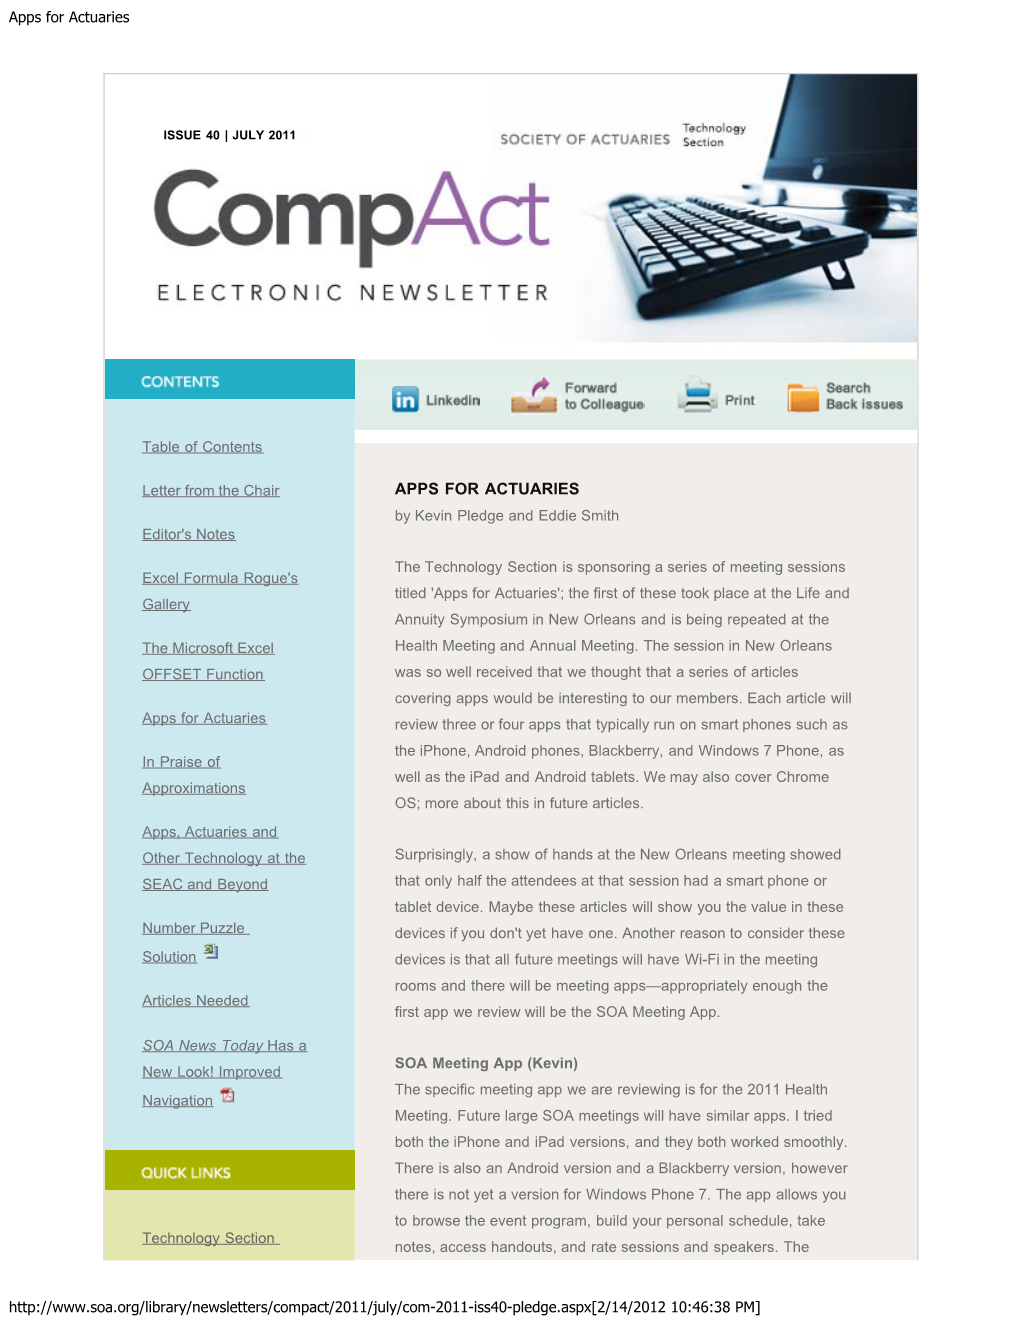 Compact Electronic Newsletter, July 2011, Issue 40